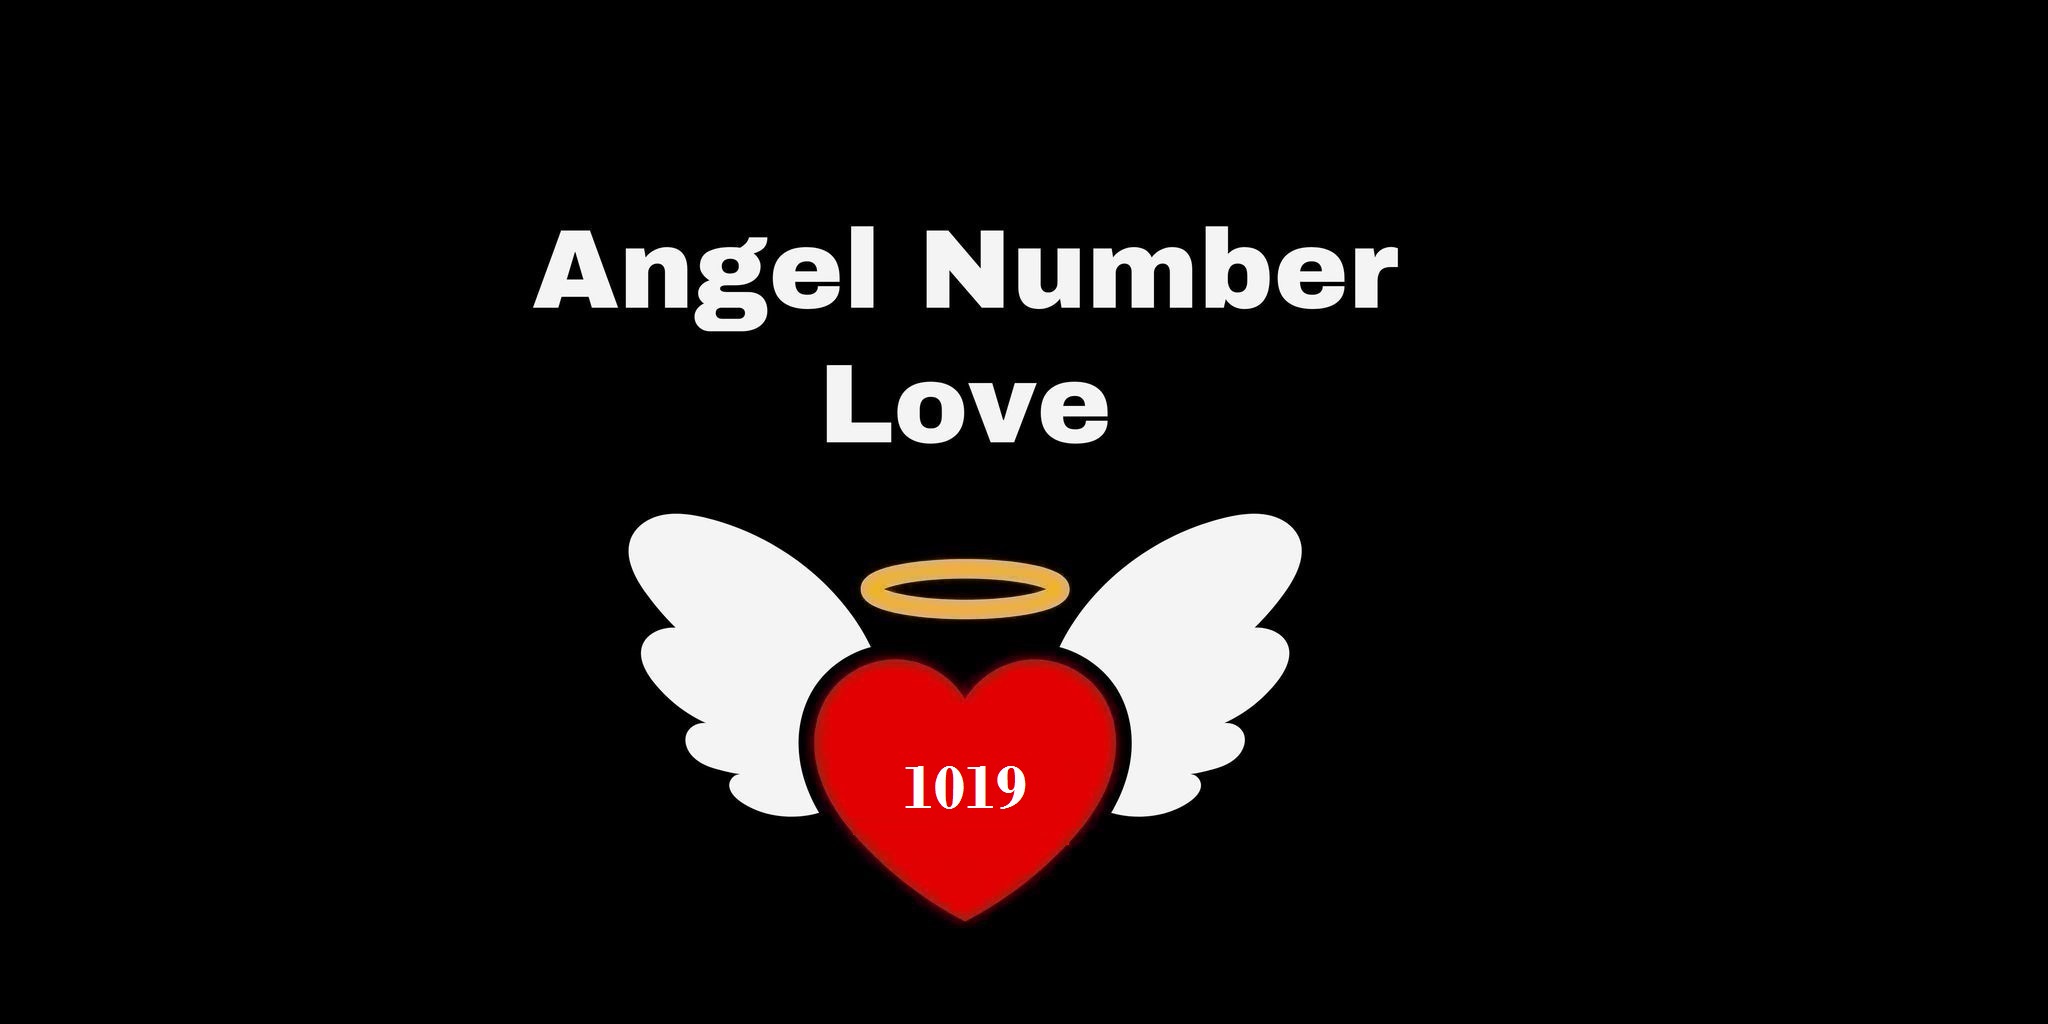 1019 Angel Number Meaning In Love